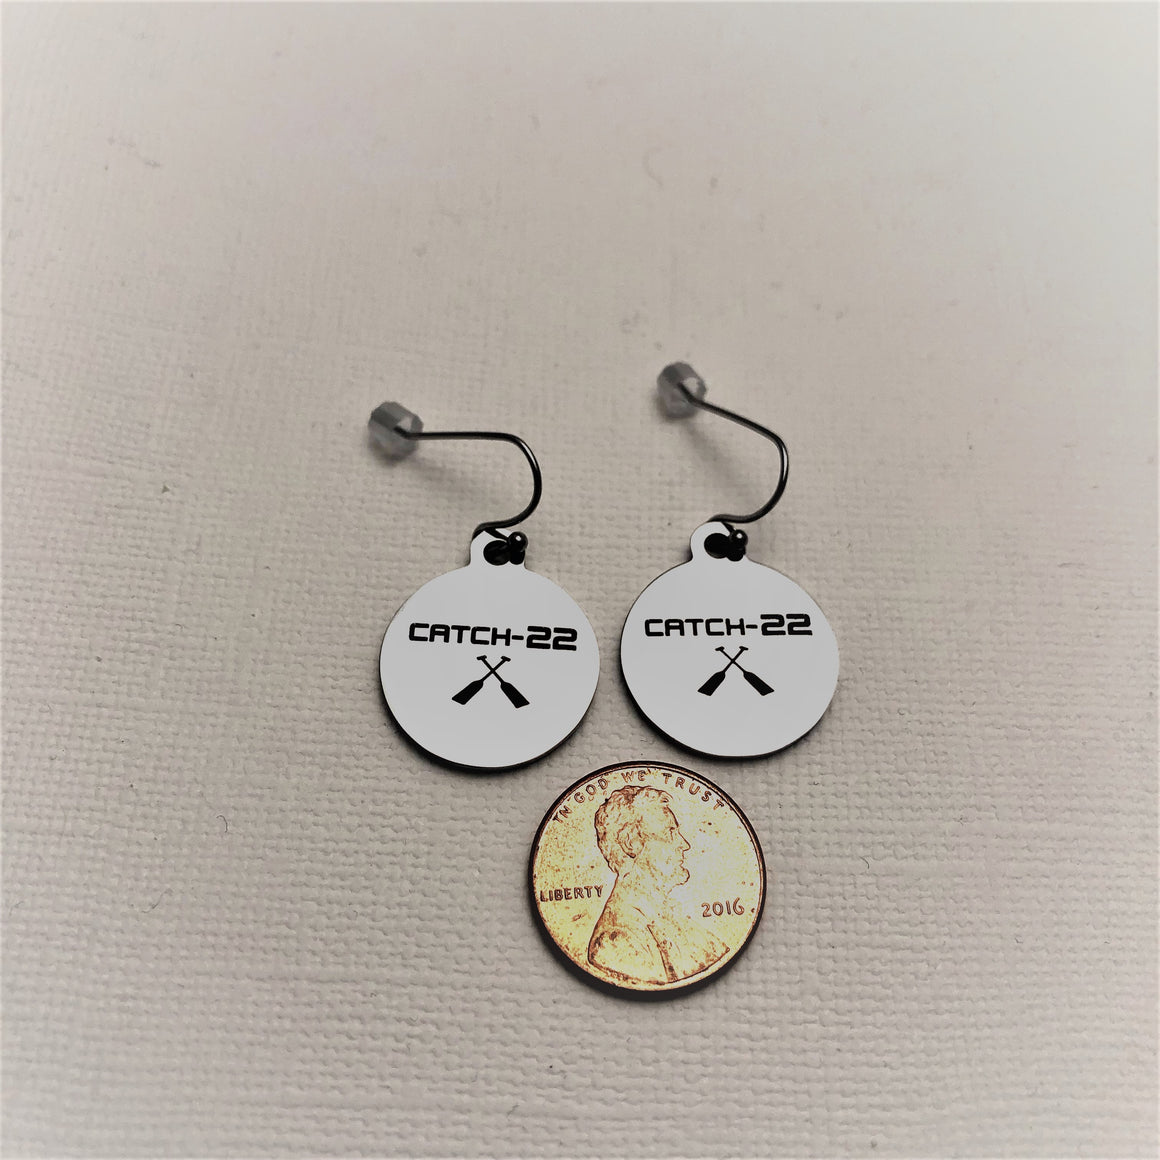 Catch-22 Paddle Earrings